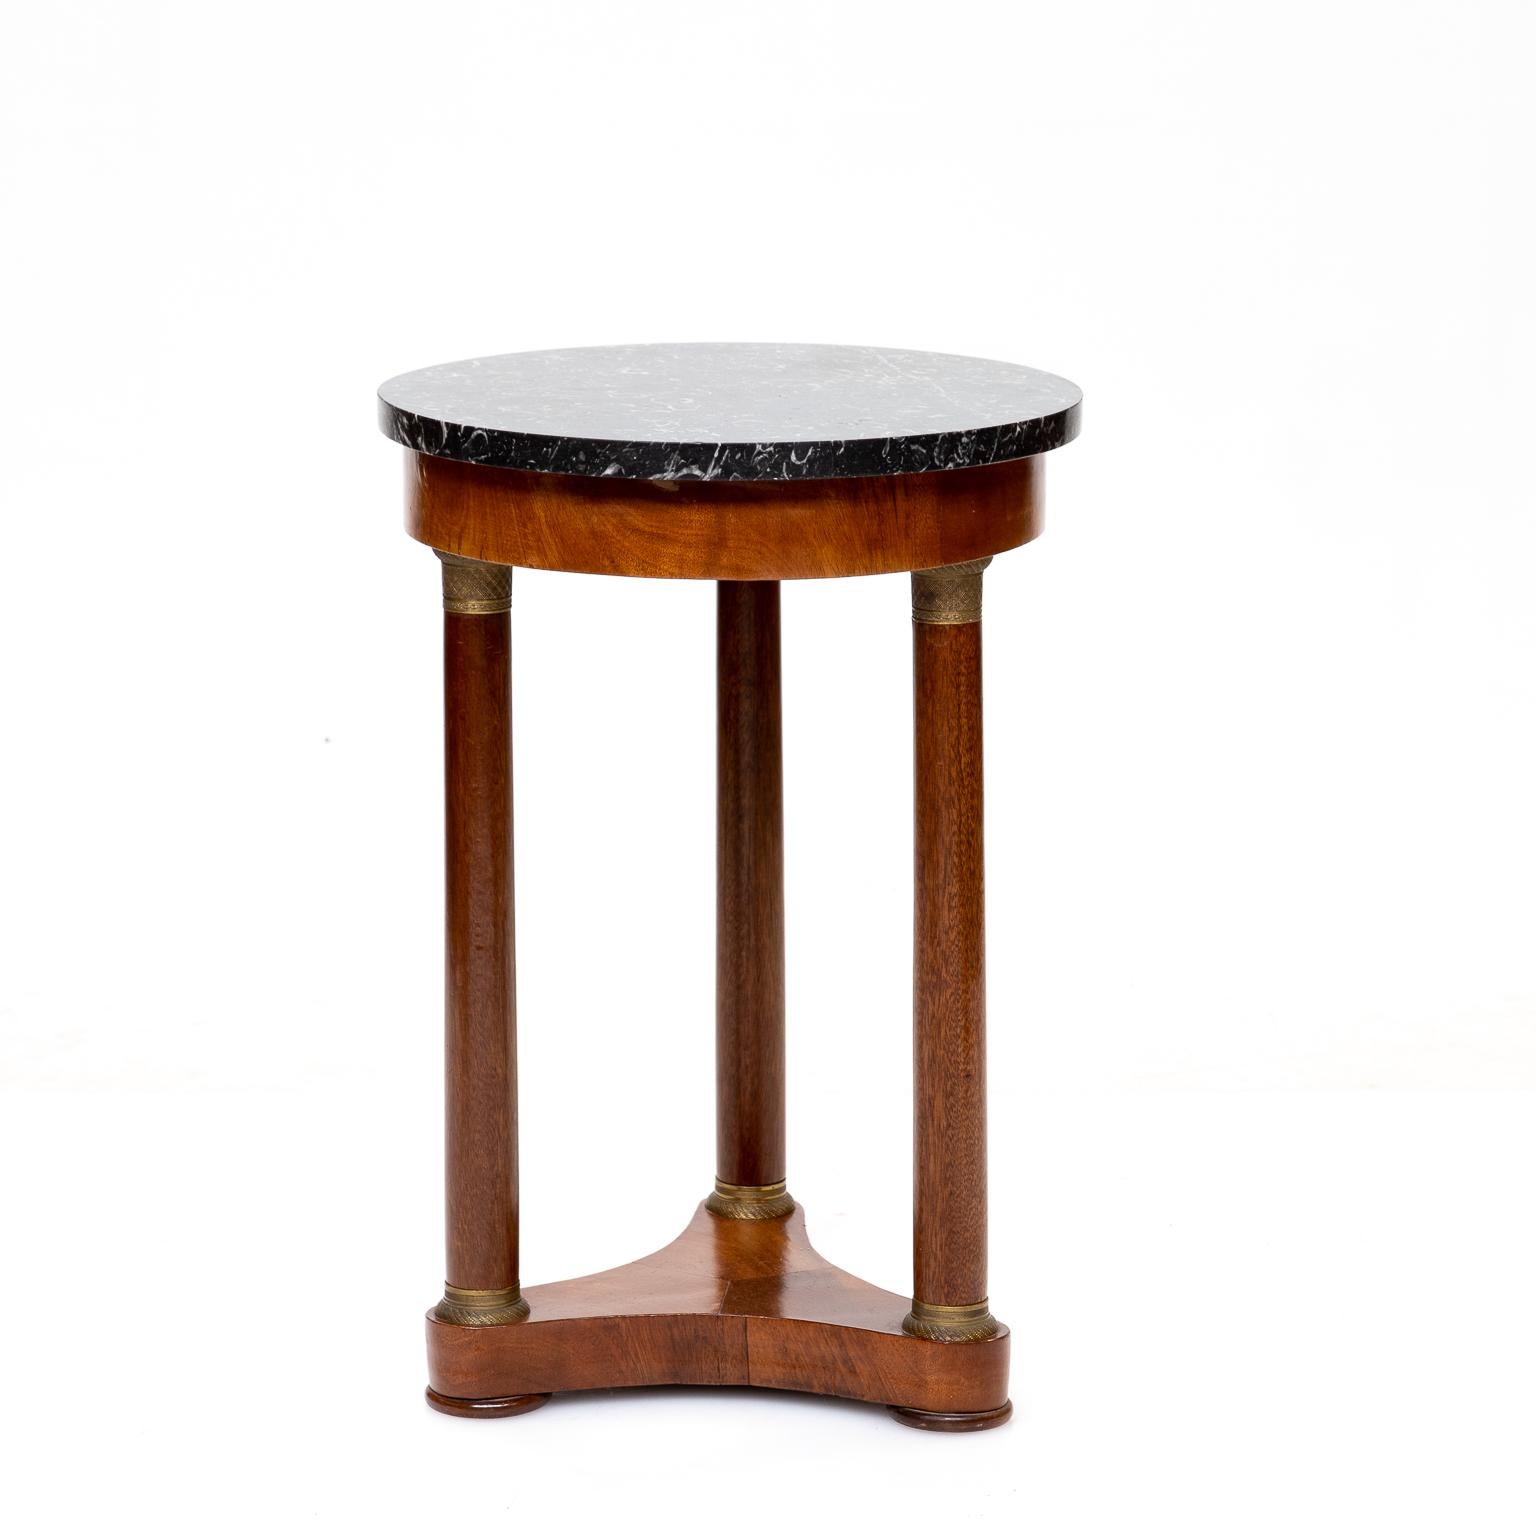 19th century French Empire marble top side table, small in size. Mahogany with bronze mounts. Very nice quality piece.